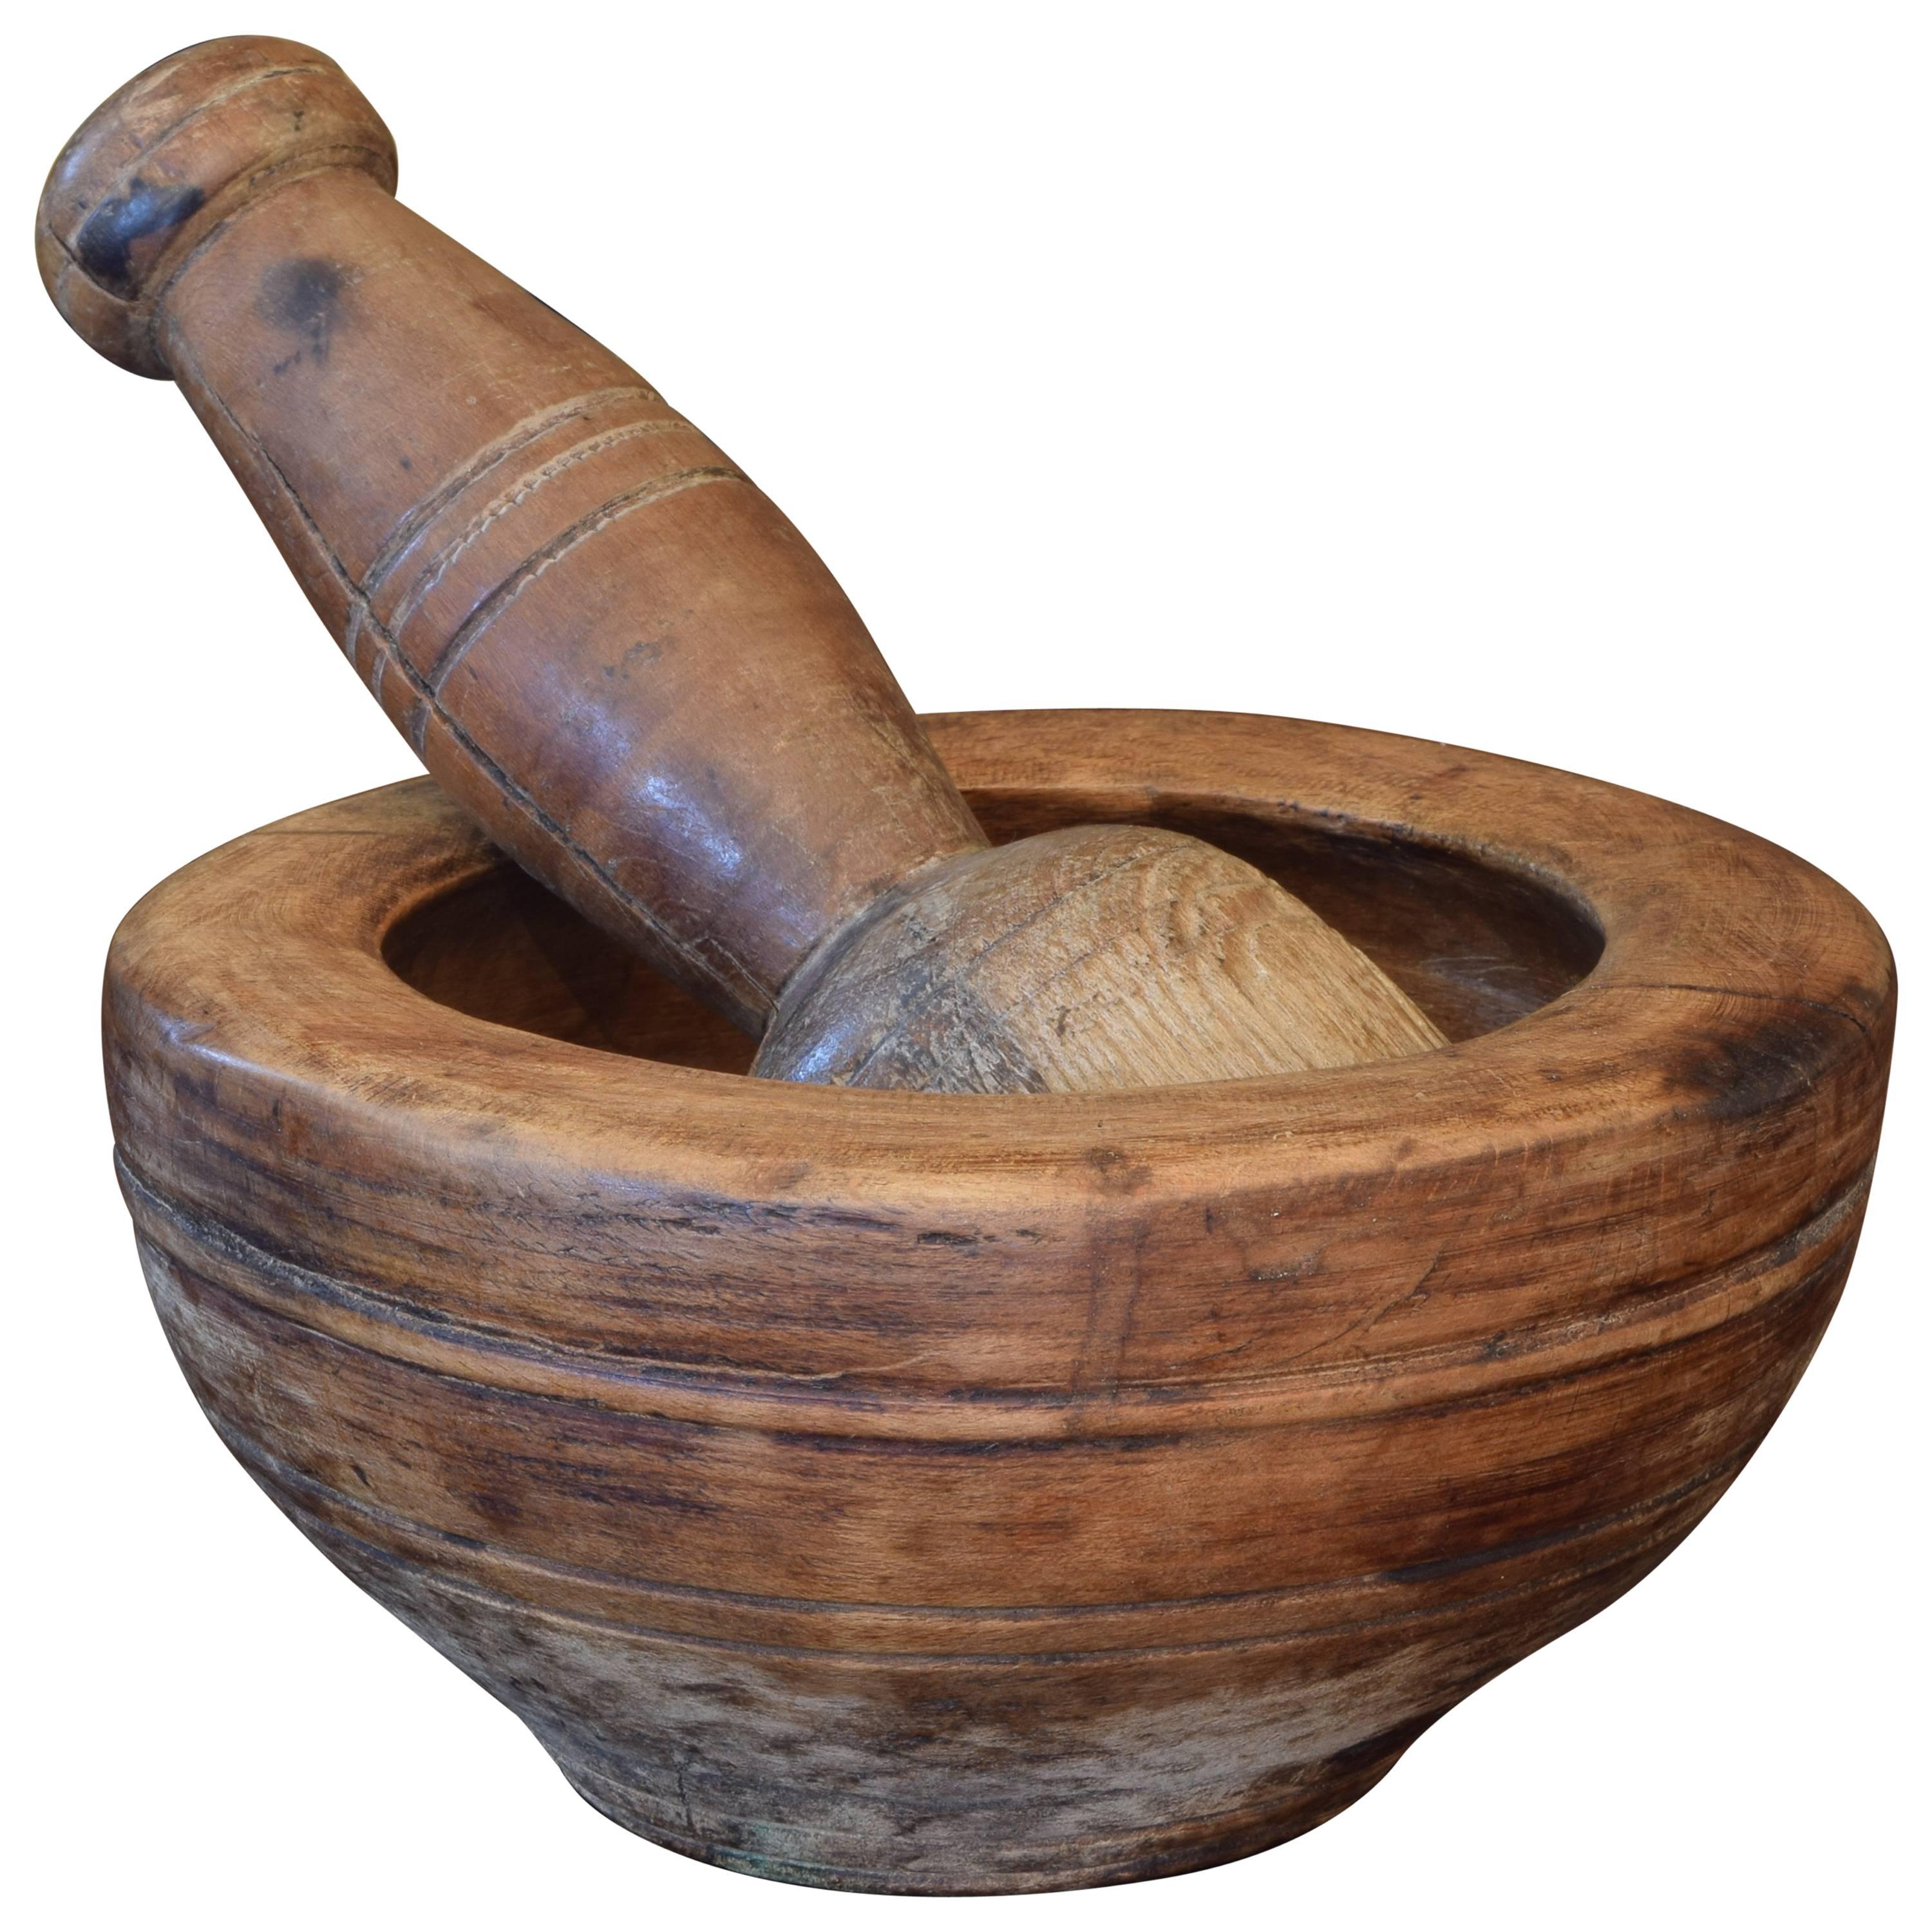 French Walnut Second Quarter of the 19th Century Mortar and Pestle